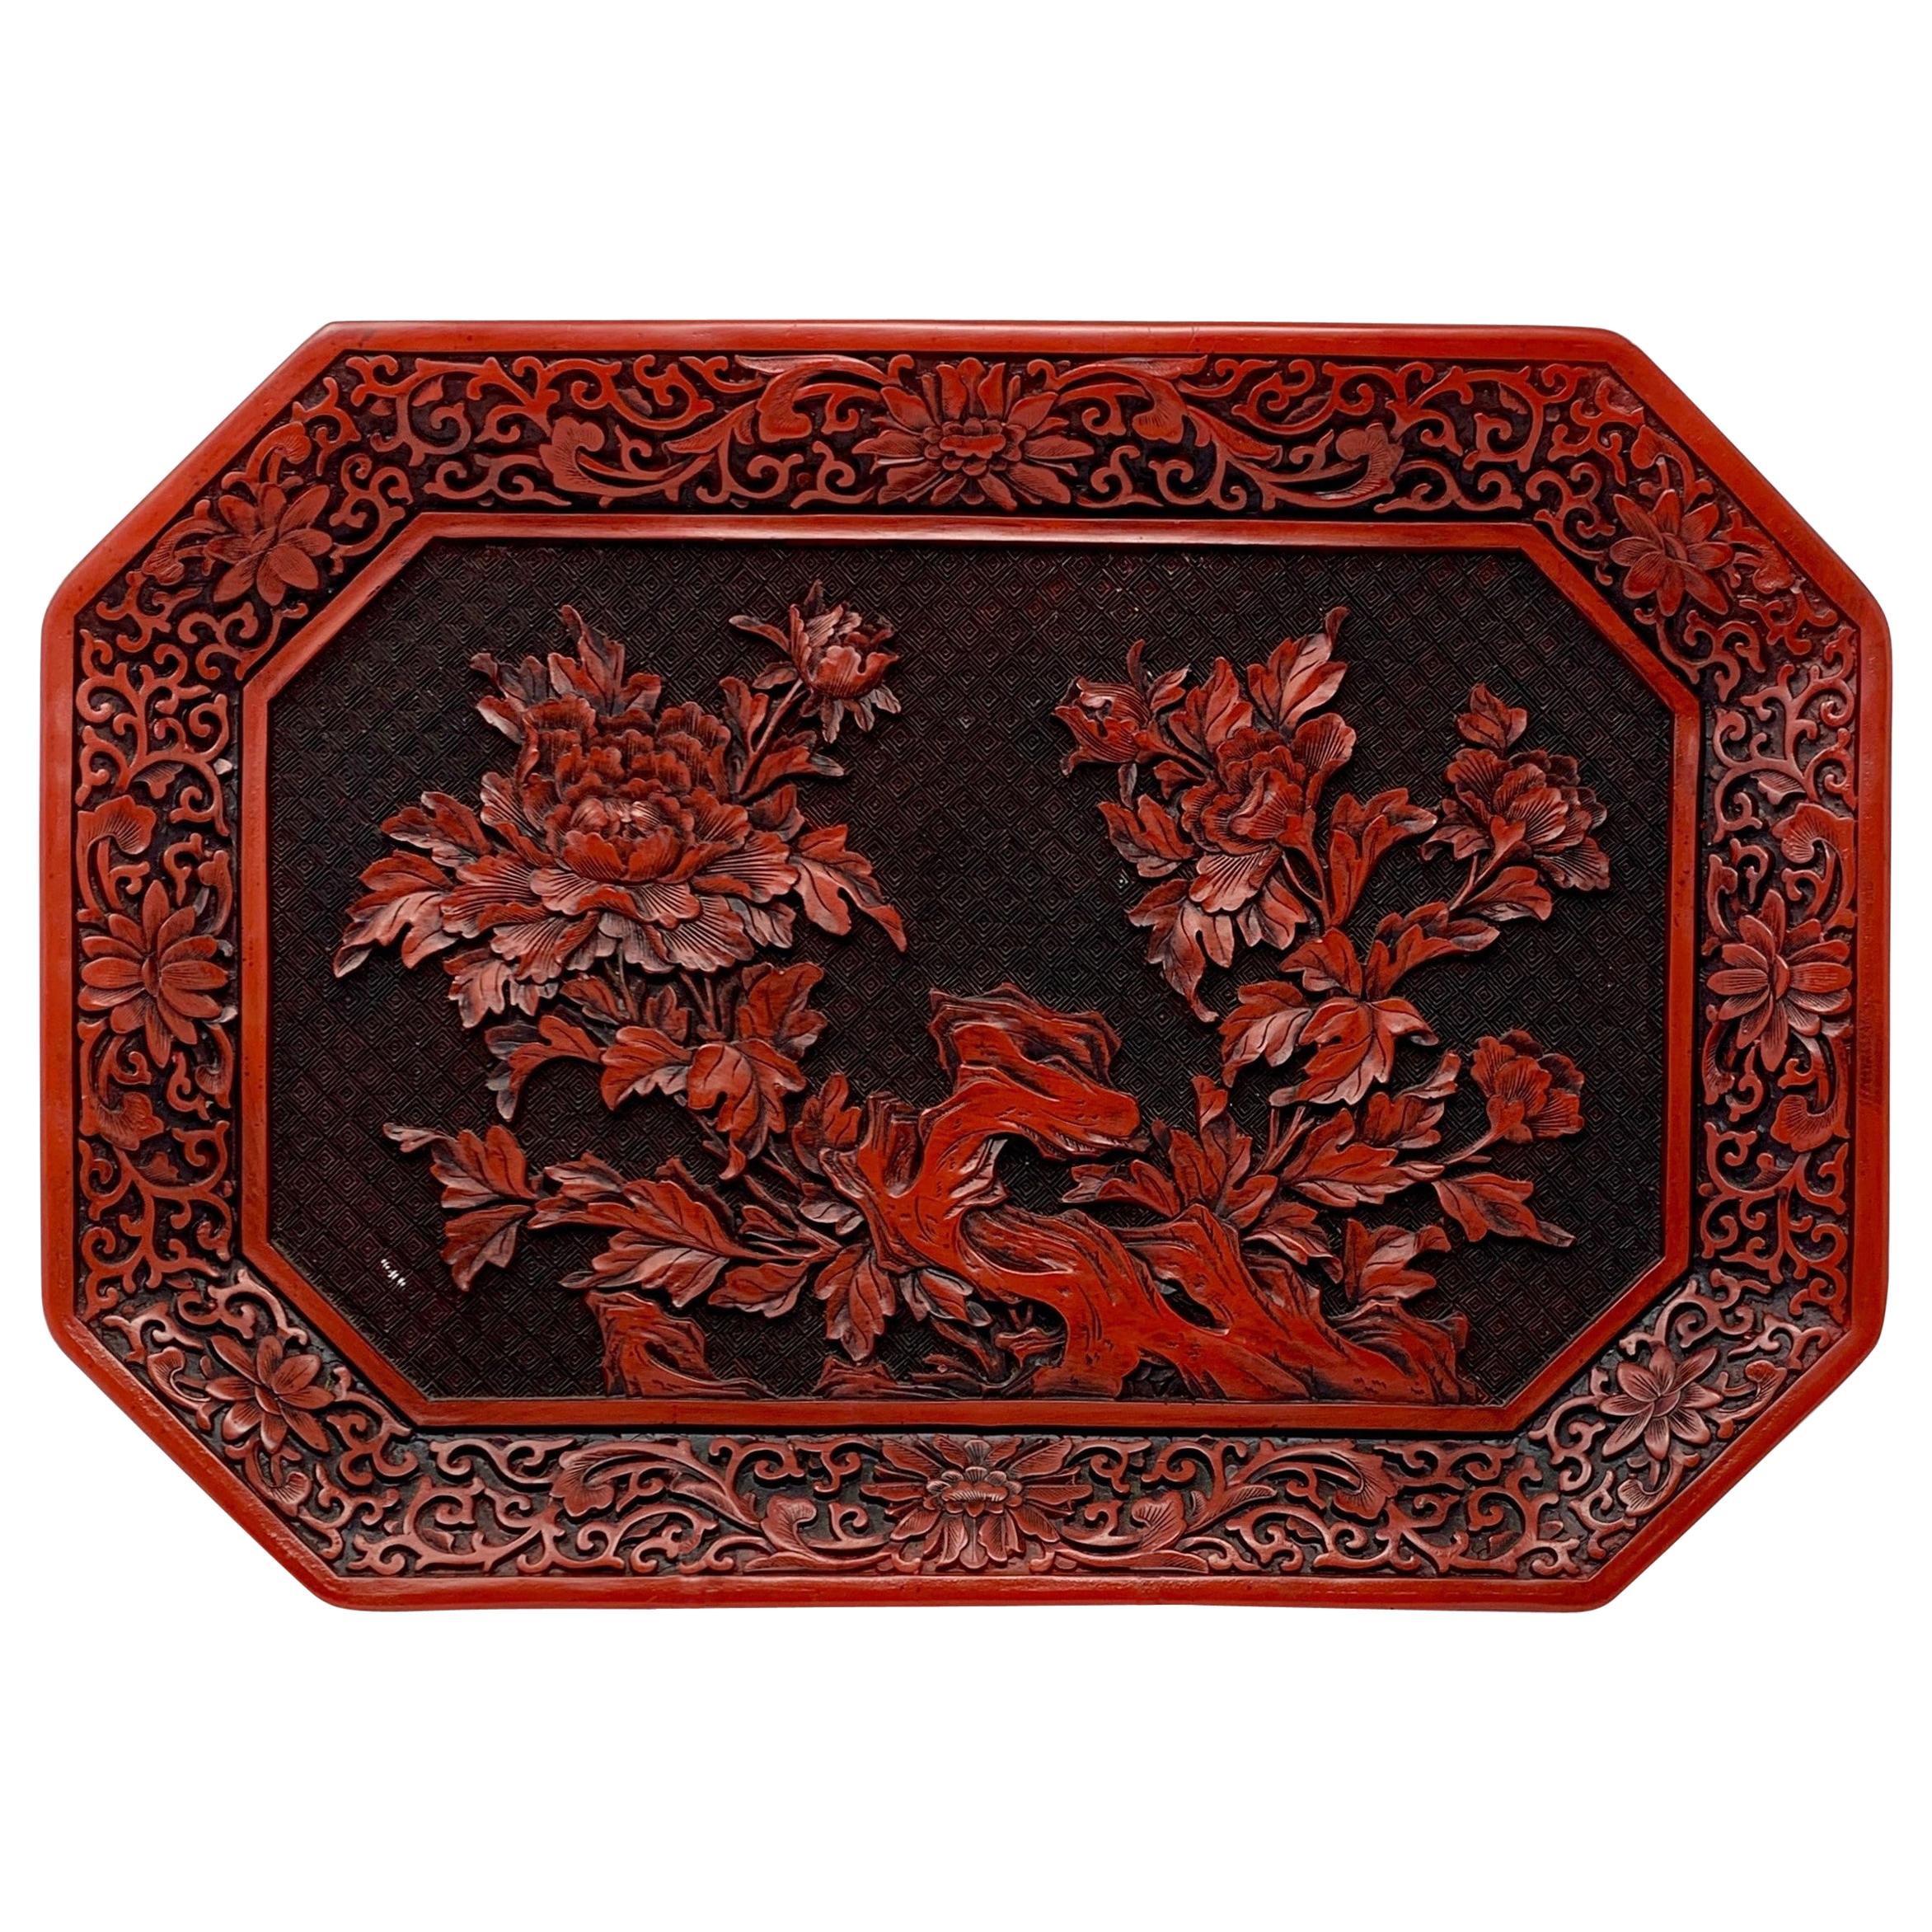 Antique Late 19th Century Chinese Lacquer Cinnabar Carved Tray